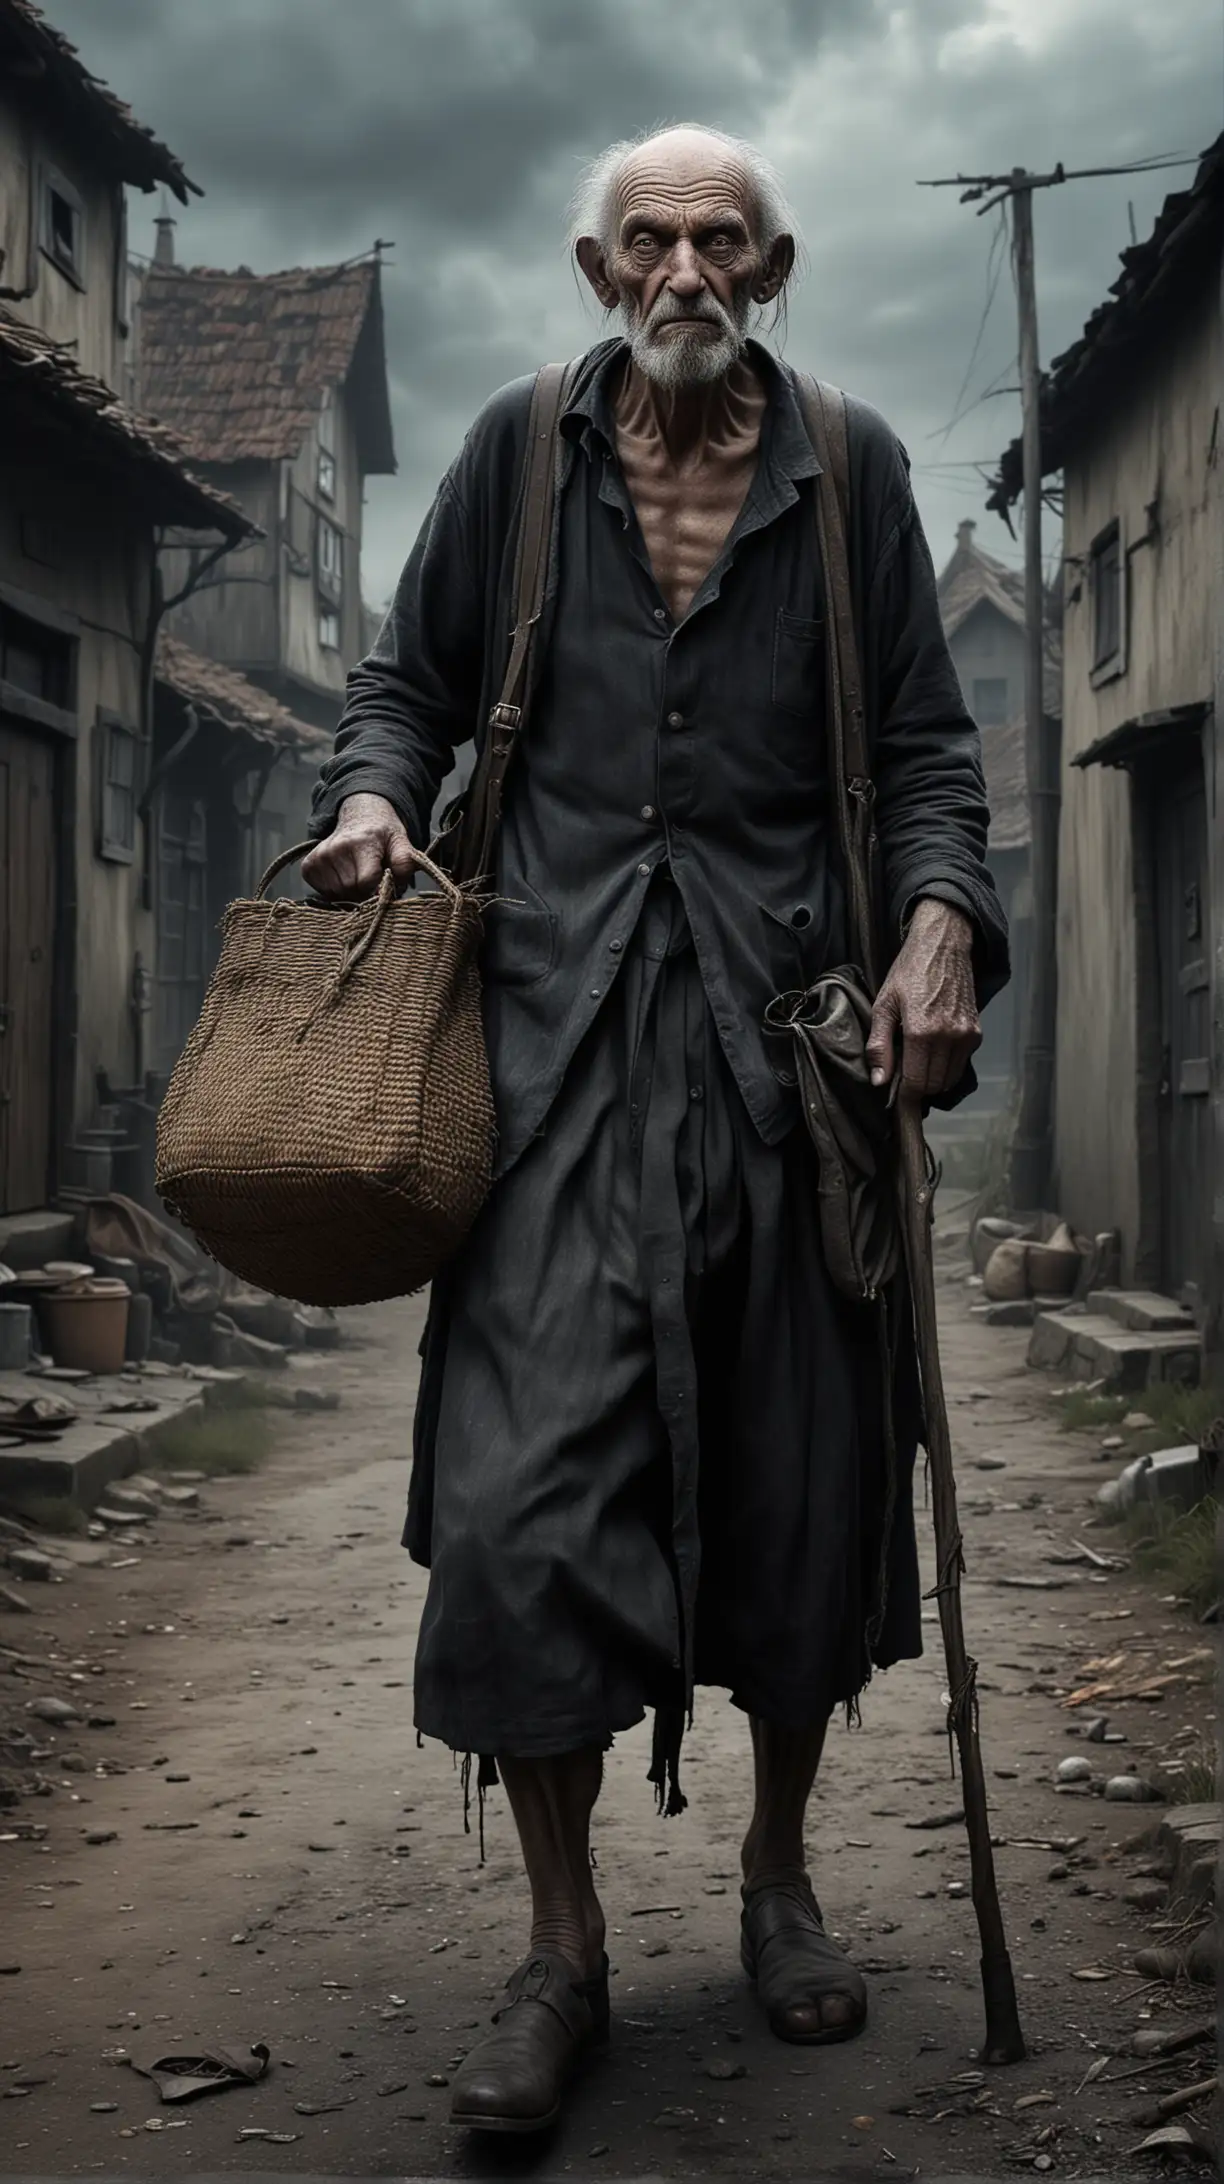 male old ugly with one eye Babay in dark horror style, pitch-black, old, crooked man who carries around a bag and cane, medival broken clothes, dark scary village houses on background, hyper-realistic, photo-realistic